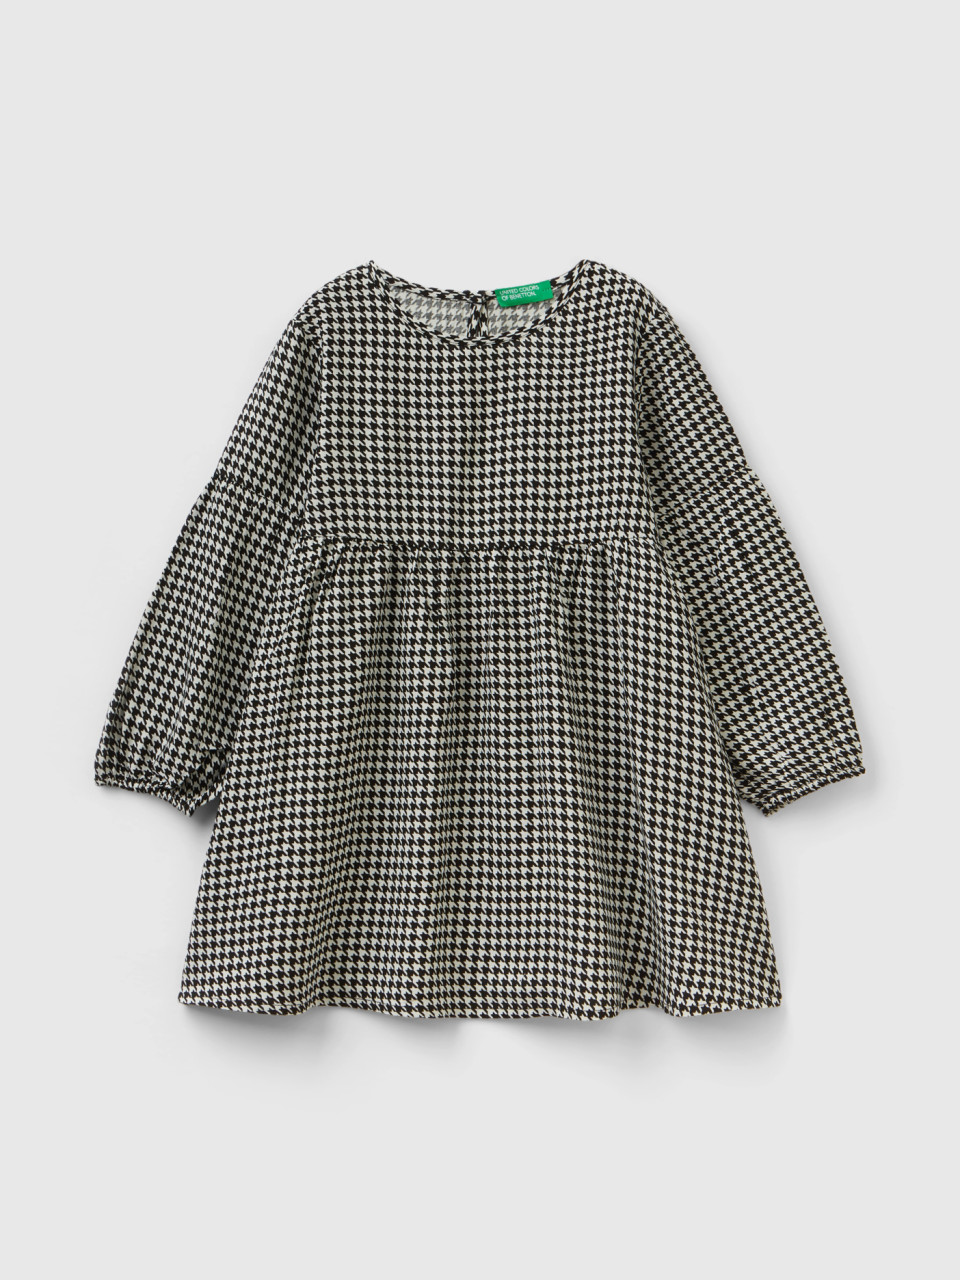 Benetton, Houndstooth Dress In Sustainable Viscose, Black, Kids